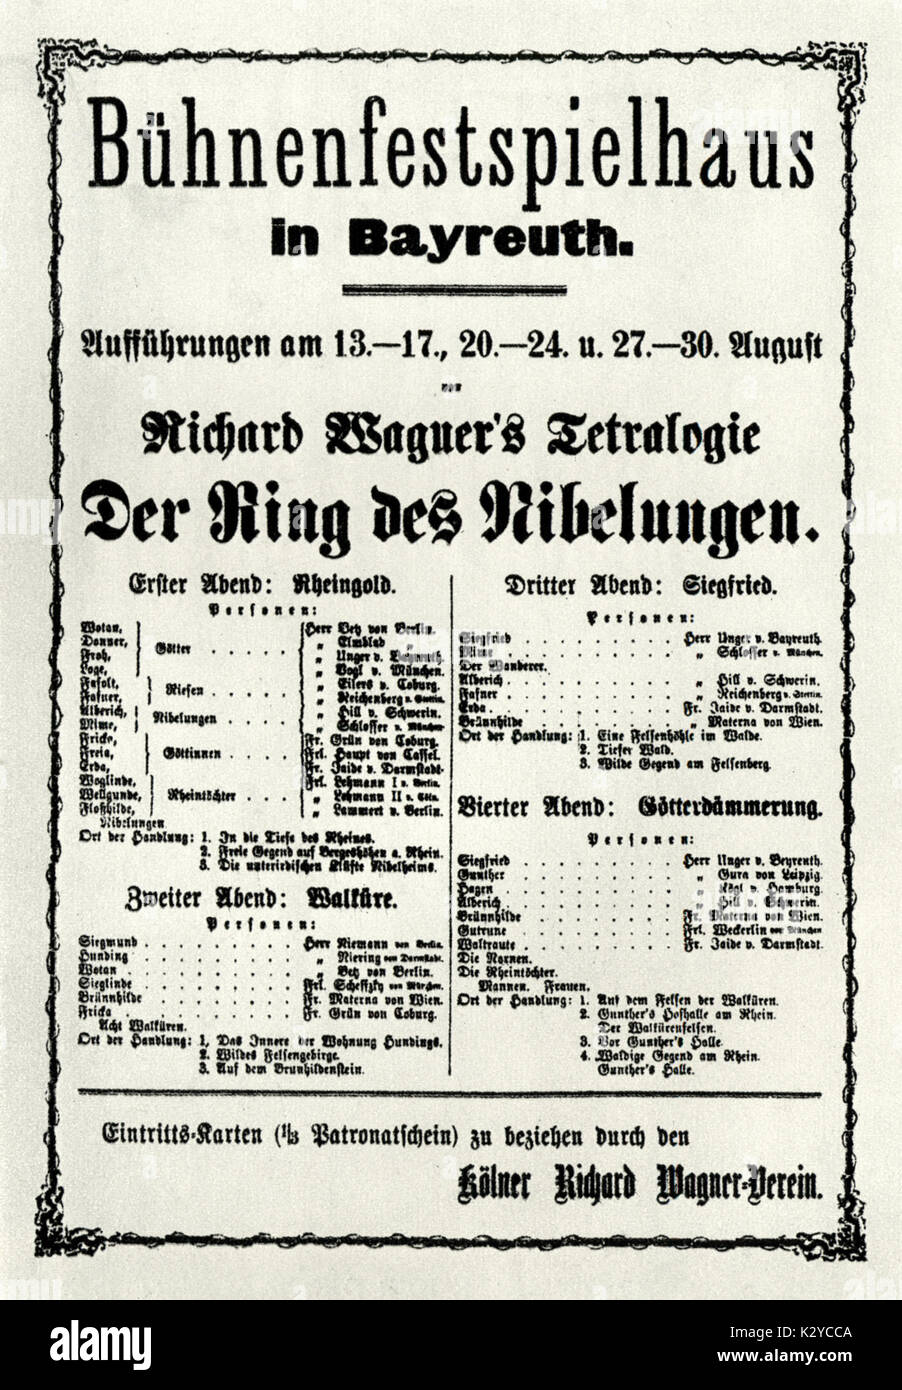 Richard WAGNER - Ring Cycle - Bayreuth Announcement  for production of the Ring Cycle at Bayreuth Bühnenfestspielhaus.  August 13-17, 20-24, 27-30, 1876 Stock Photo